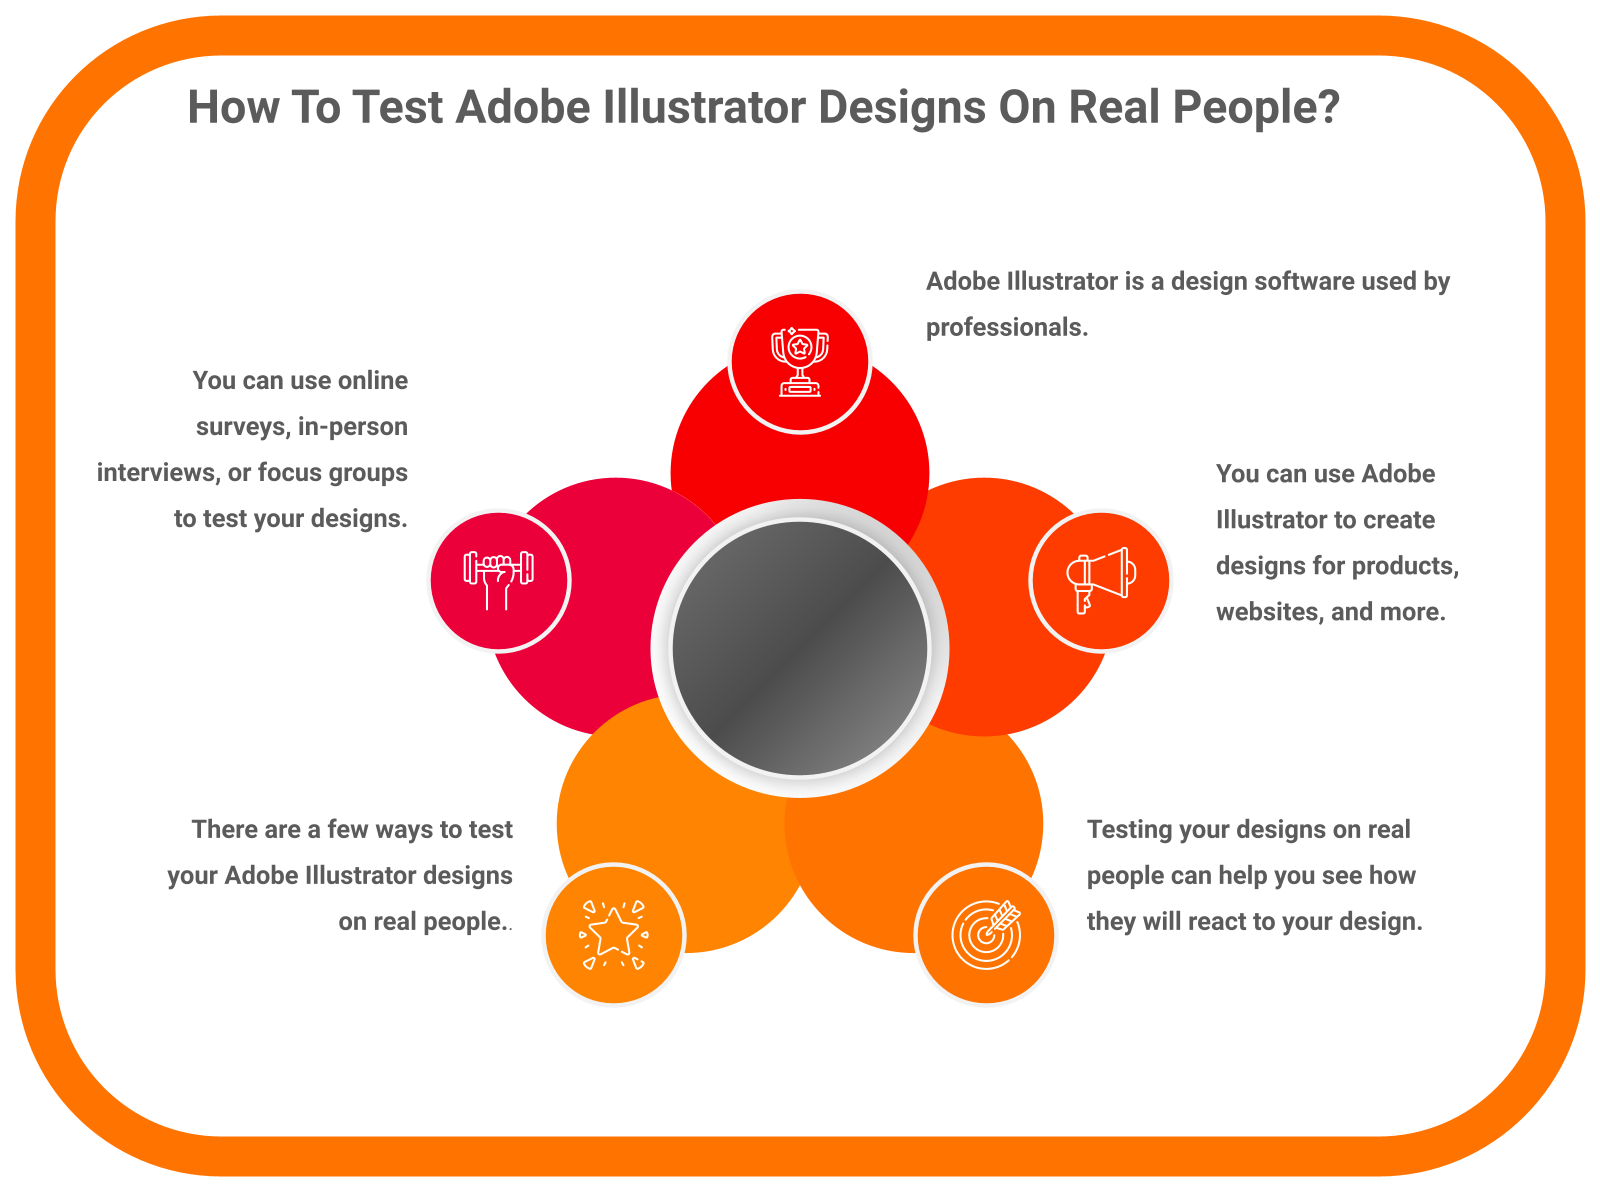 How To Test Adobe Illustrator Designs On Real People?